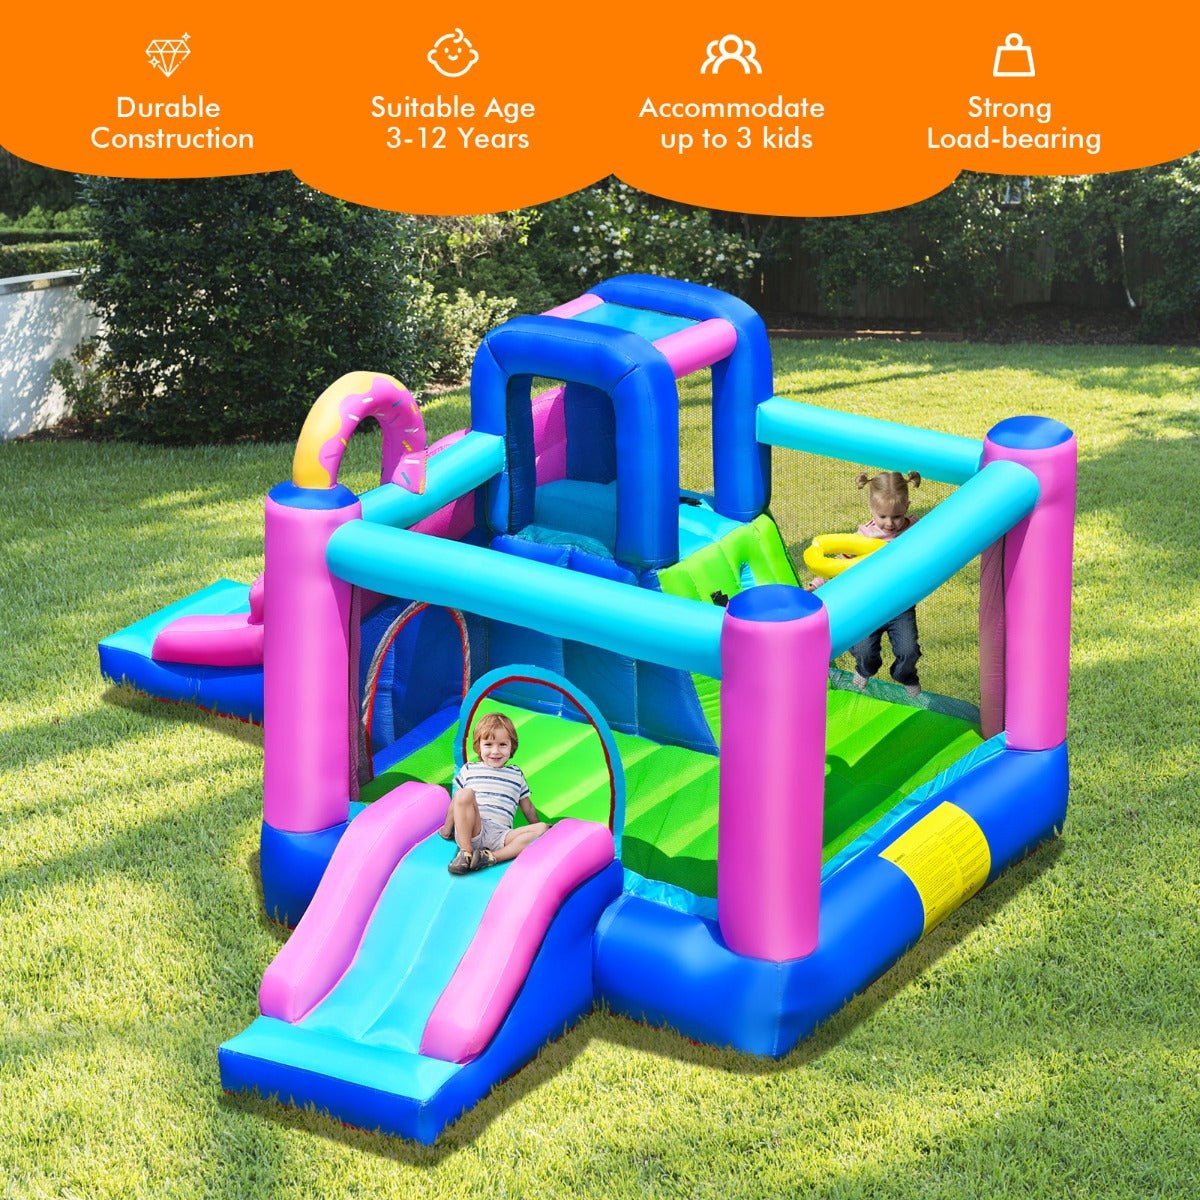 Exciting Adventure: Inflatable Bounce House with Dual Slides for Playtime